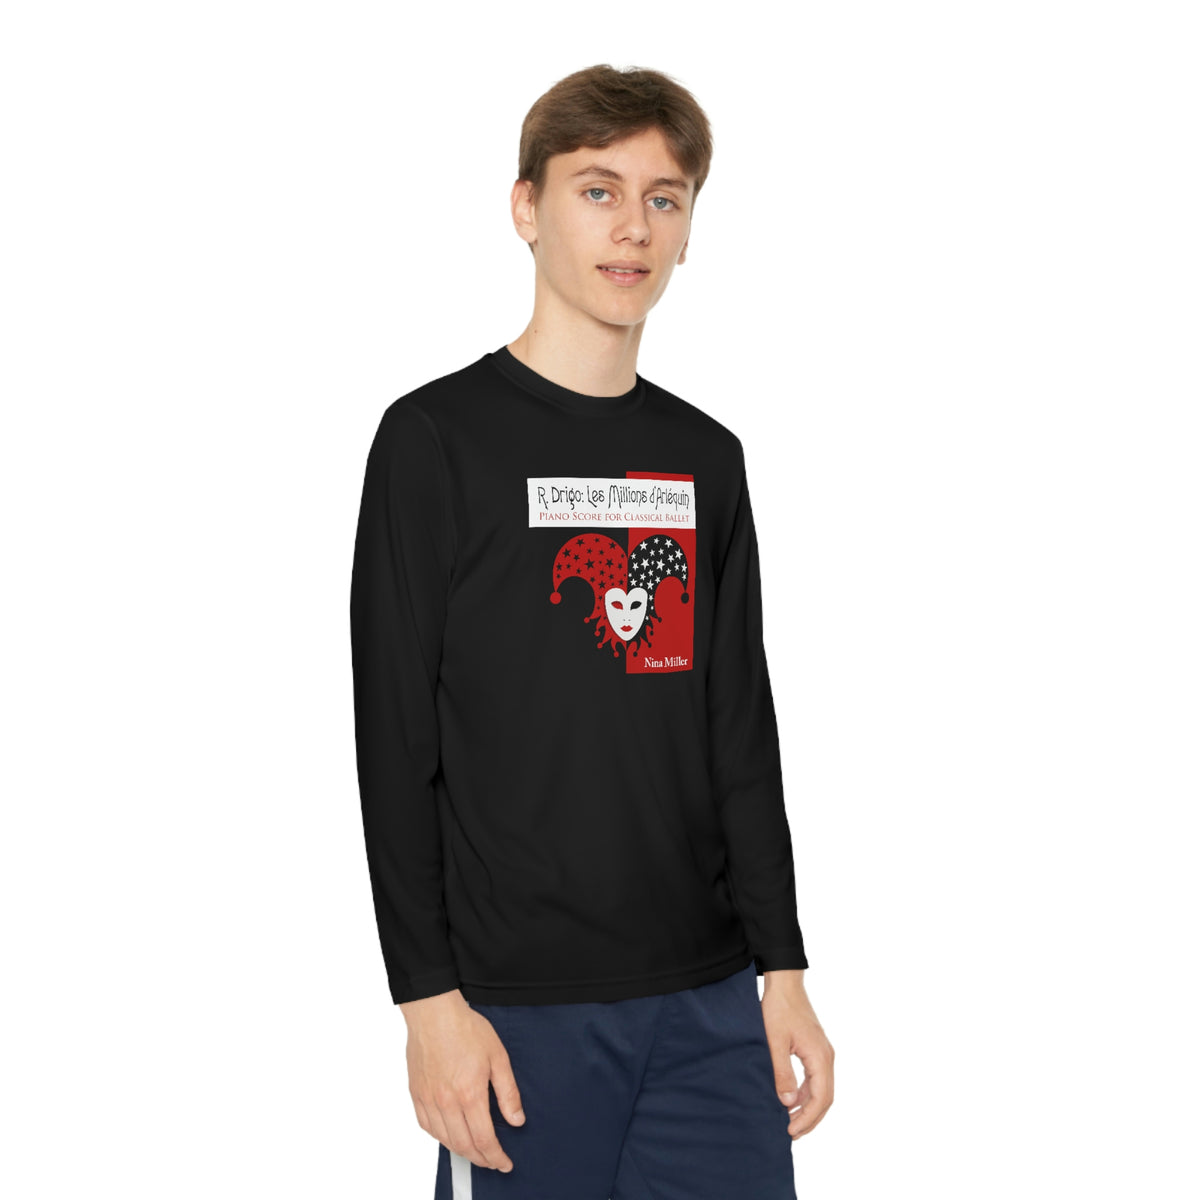 Les Millions d'Arlequin (Black) - Youth Long Sleeve Competitor Tee